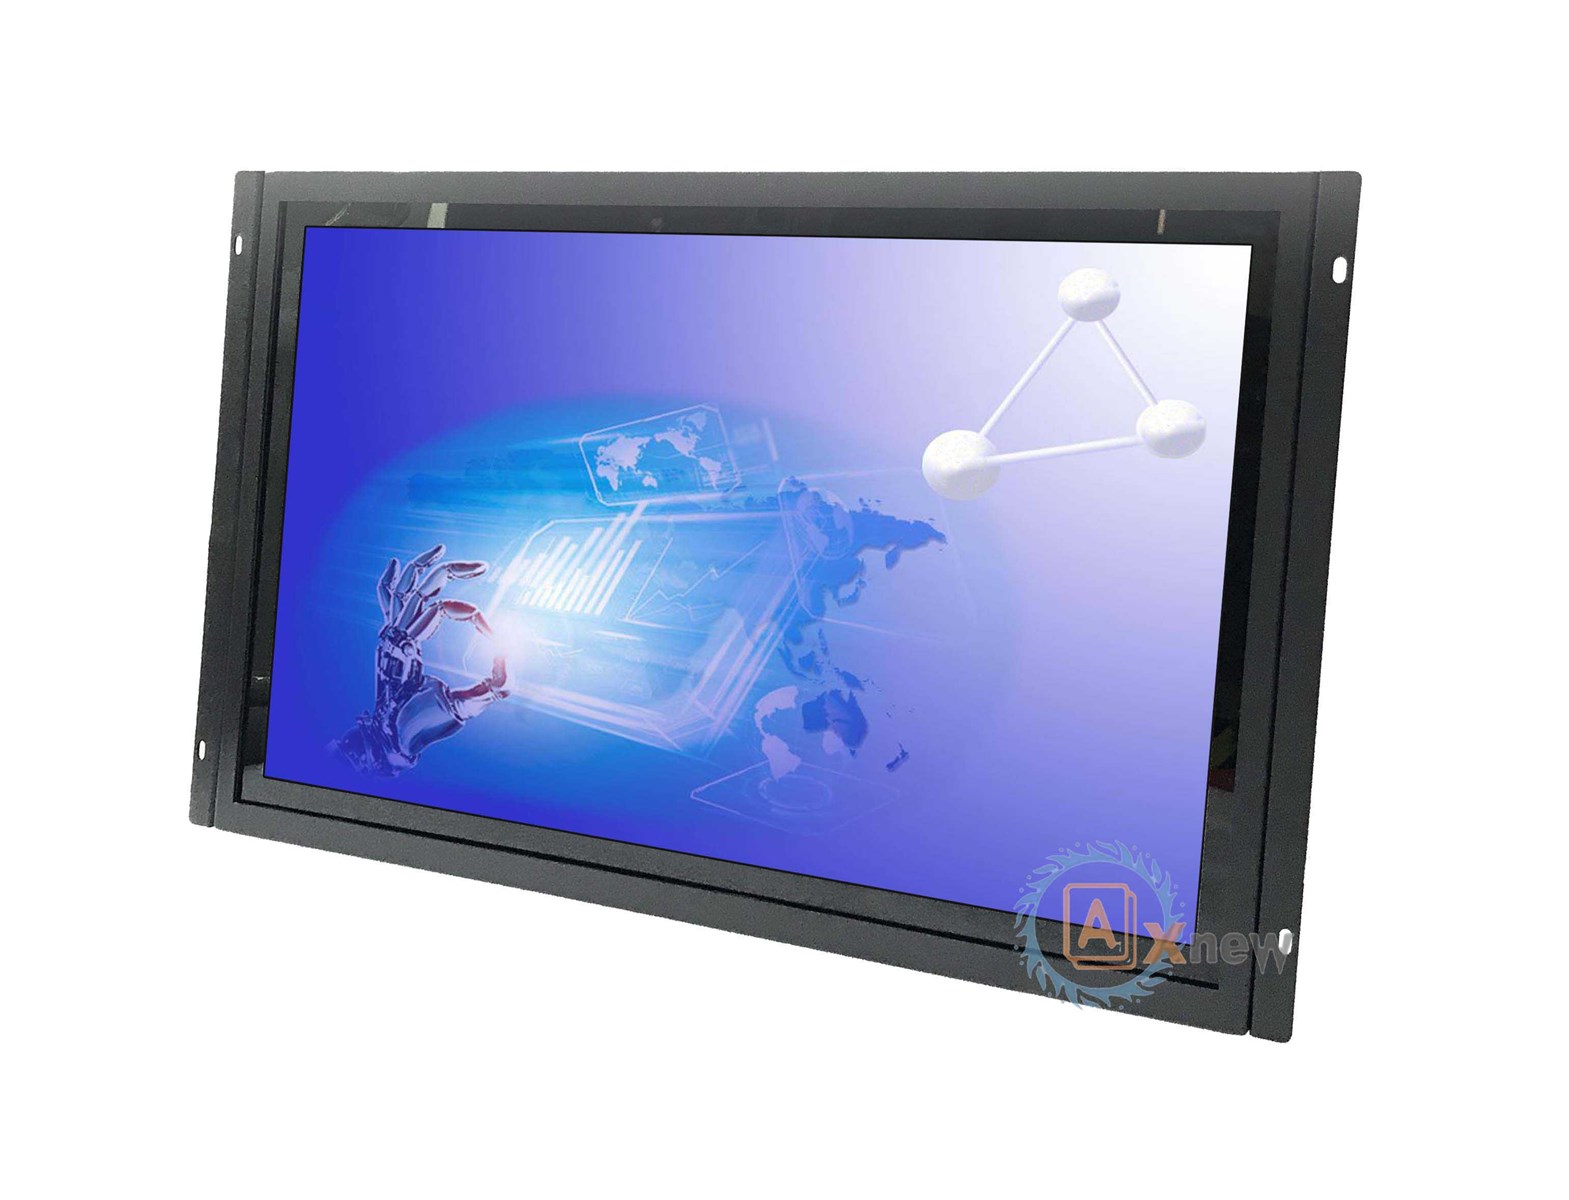 185 inch High Brightness Wide Screen Open frame LCD Monitor with projected capacitive touch